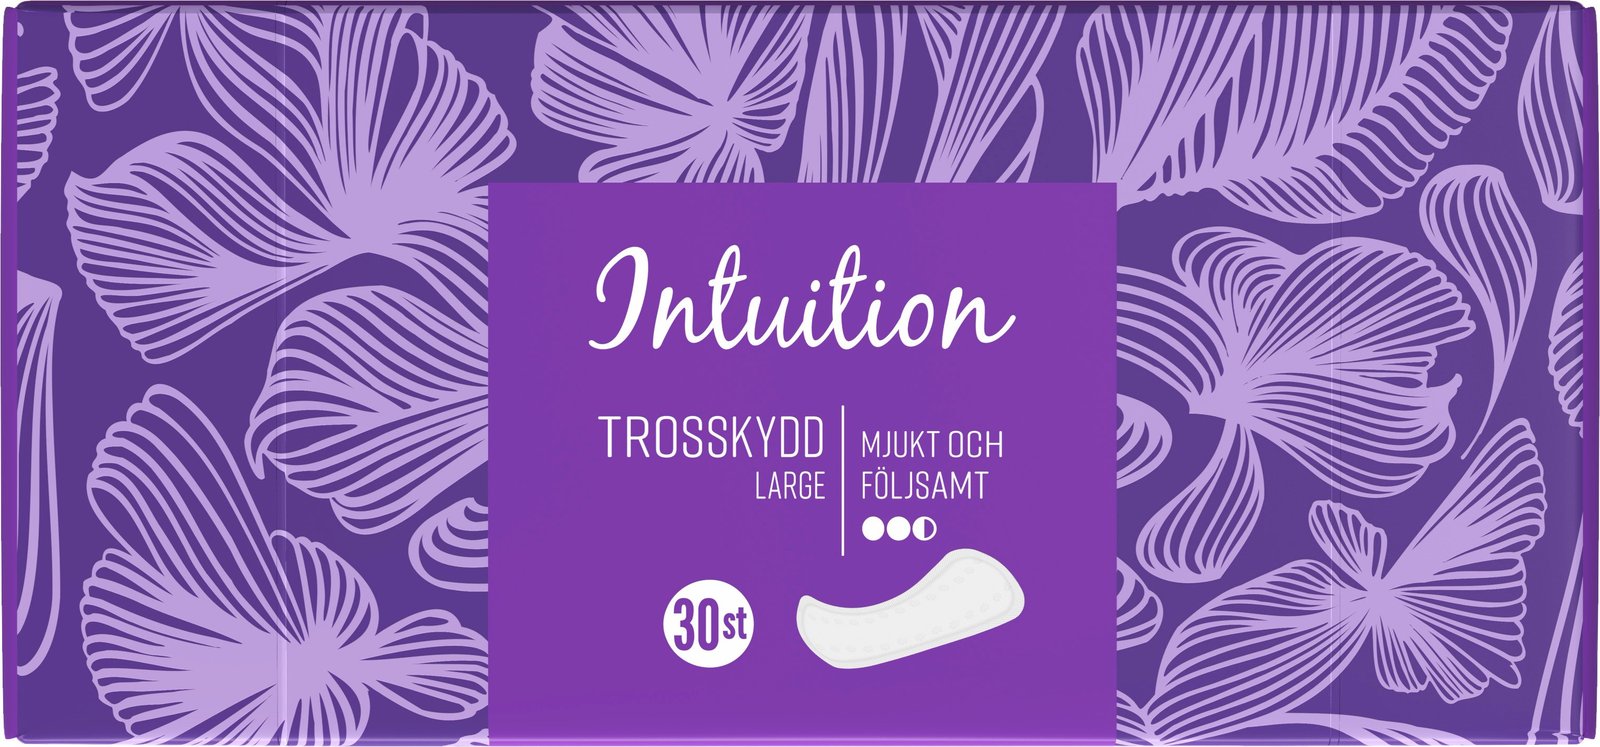 Intuition Large Trosskydd 30 st